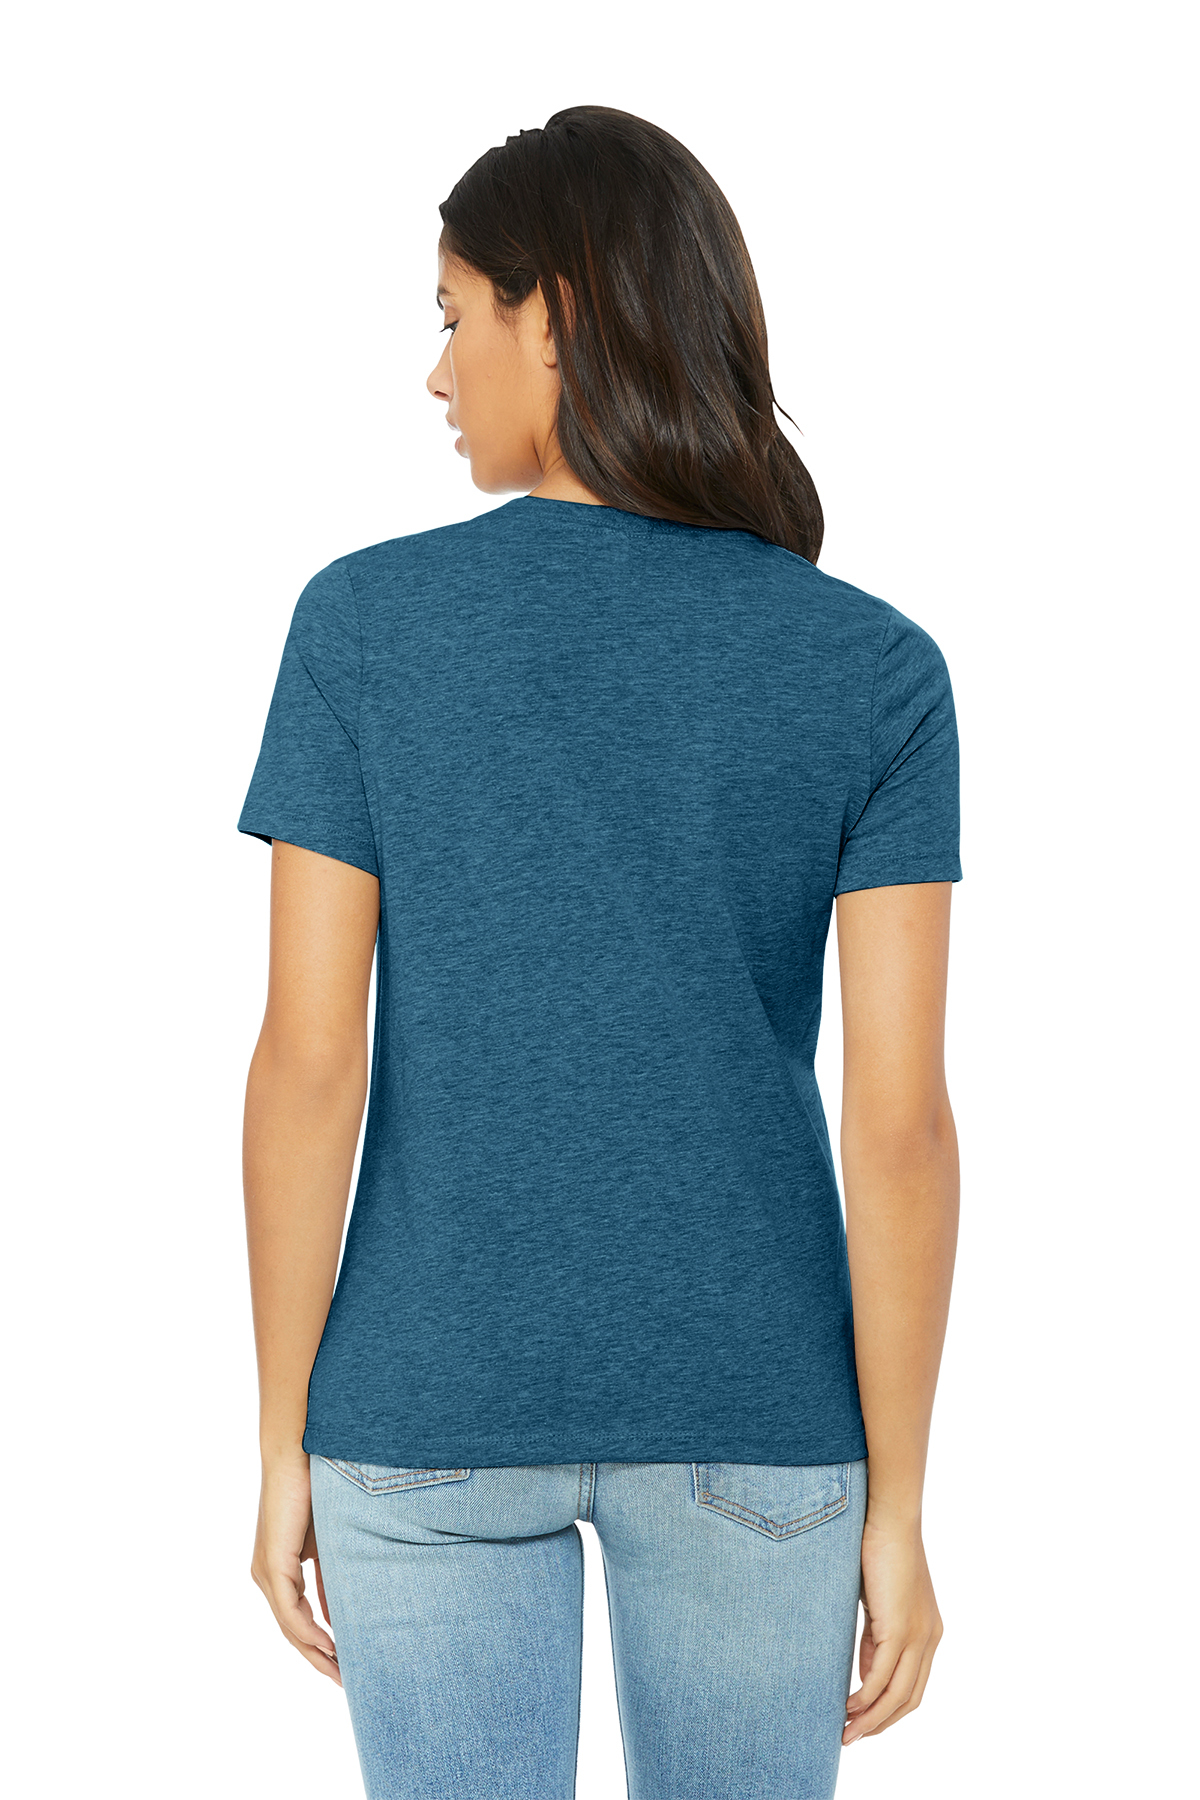 BELLA+CANVAS Women’s Relaxed CVC Tee | Product | Company Casuals